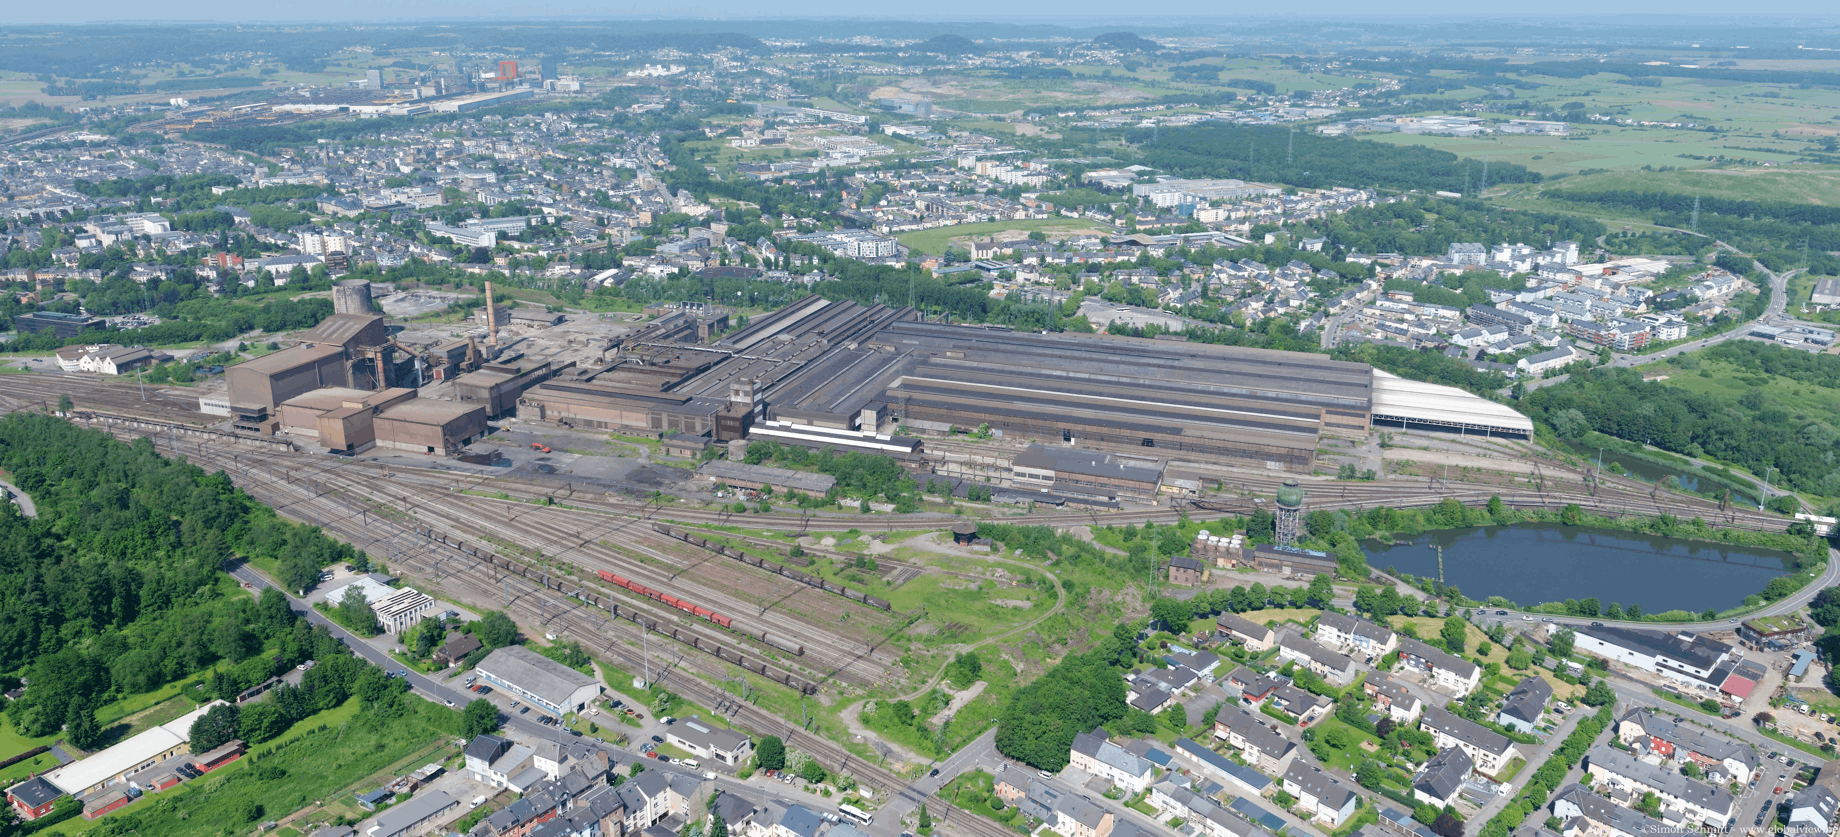 L’ancien site industriel d’ArcelorMittal (54 hectares). (Photo: Agora)